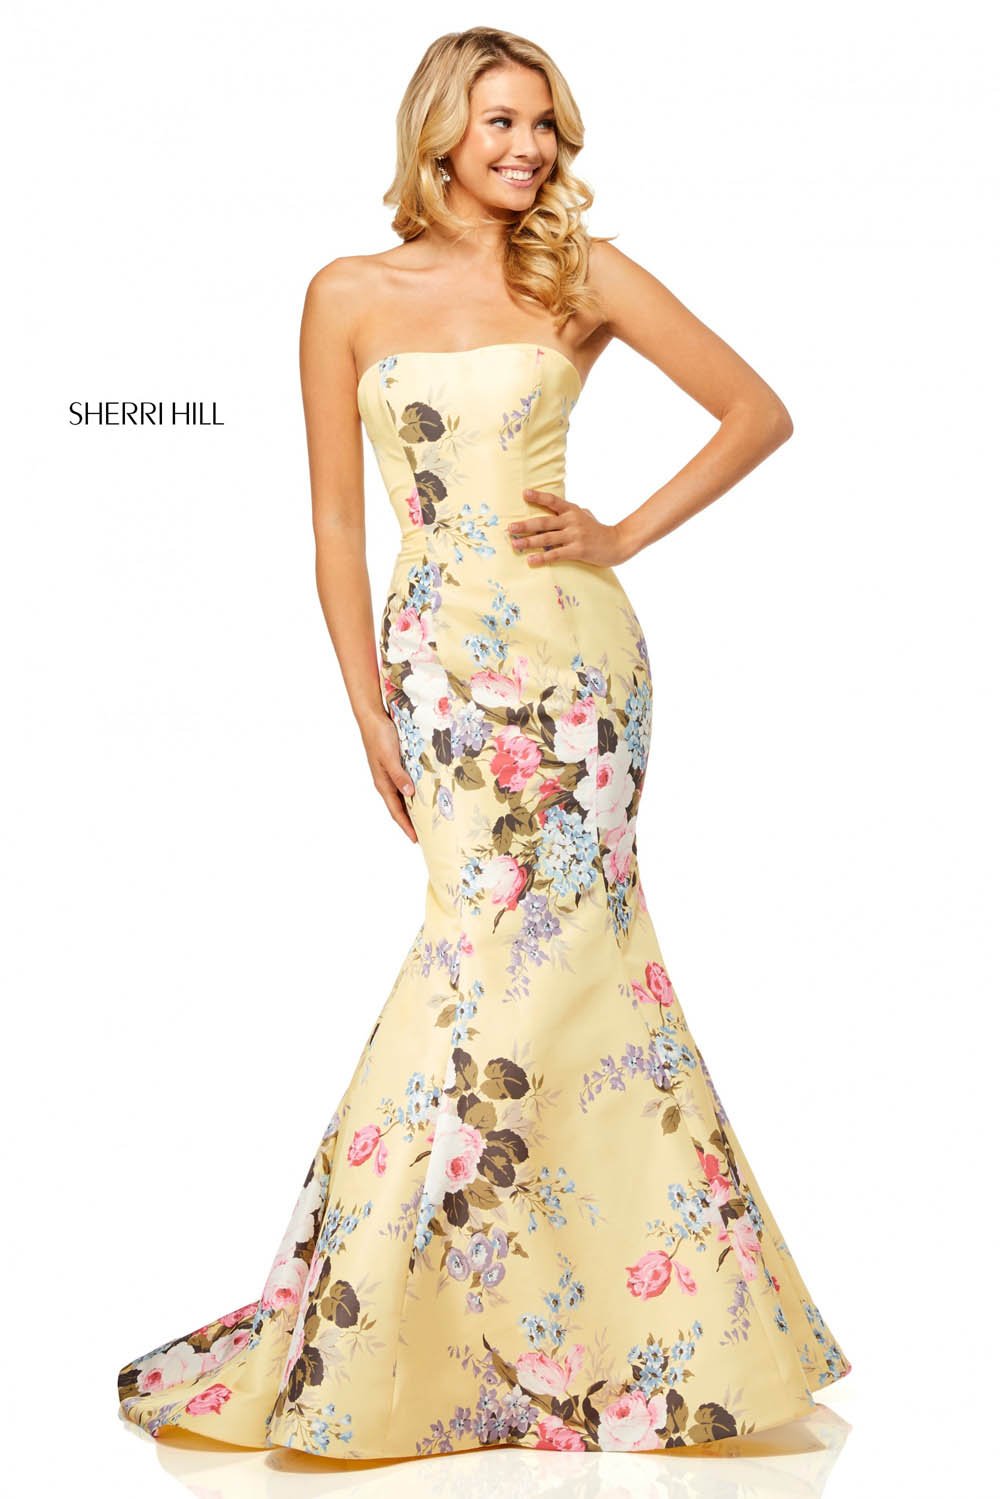 Sherri Hill 52551 dress images in these colors: Yellow Print, Ivory Print, Light Blue Print, Lilac Print.